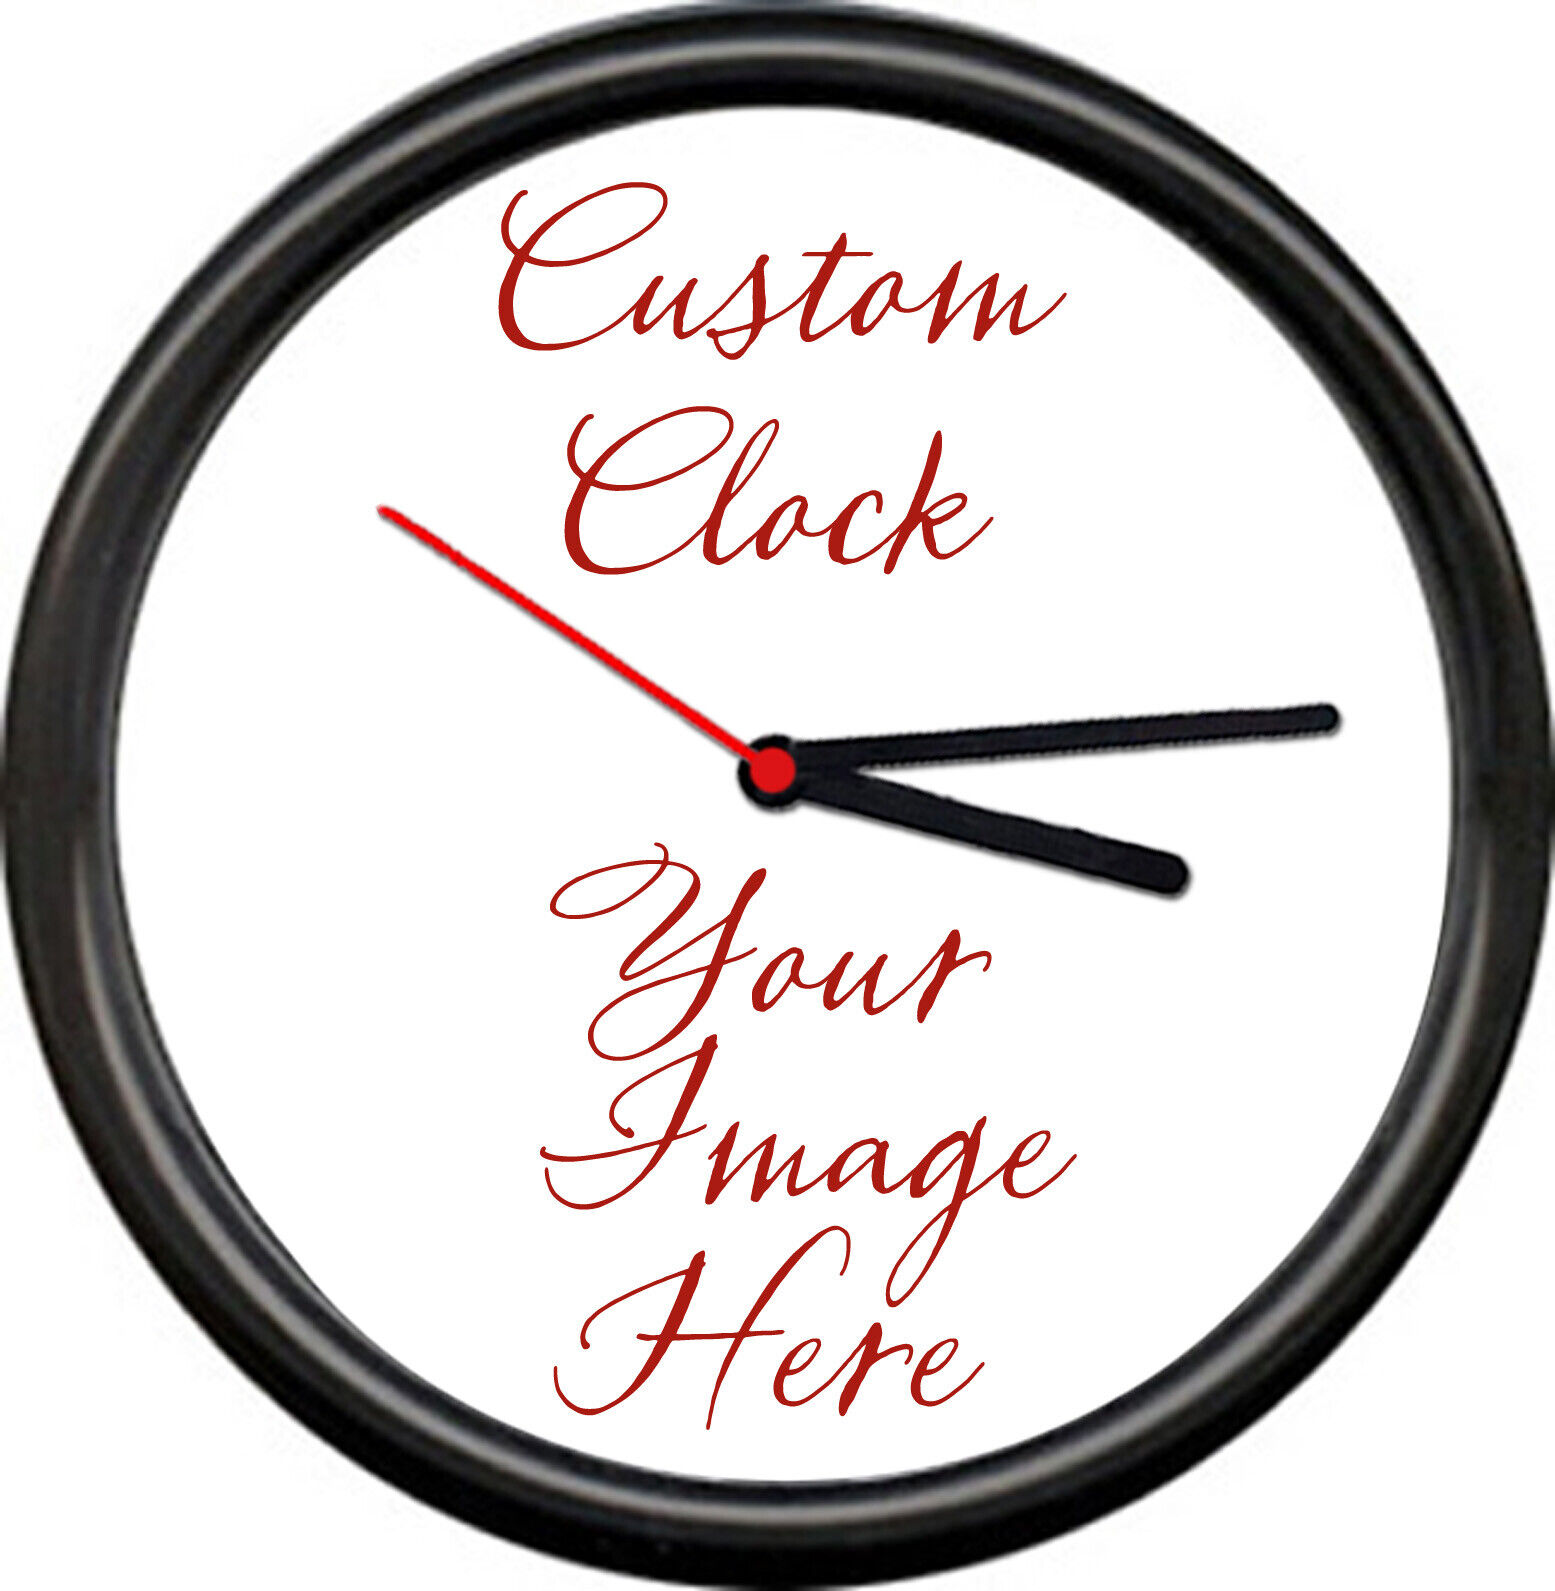 Personalized Custom Image Your Logo Or Design Any Photo Or Text Gift Wall Clock